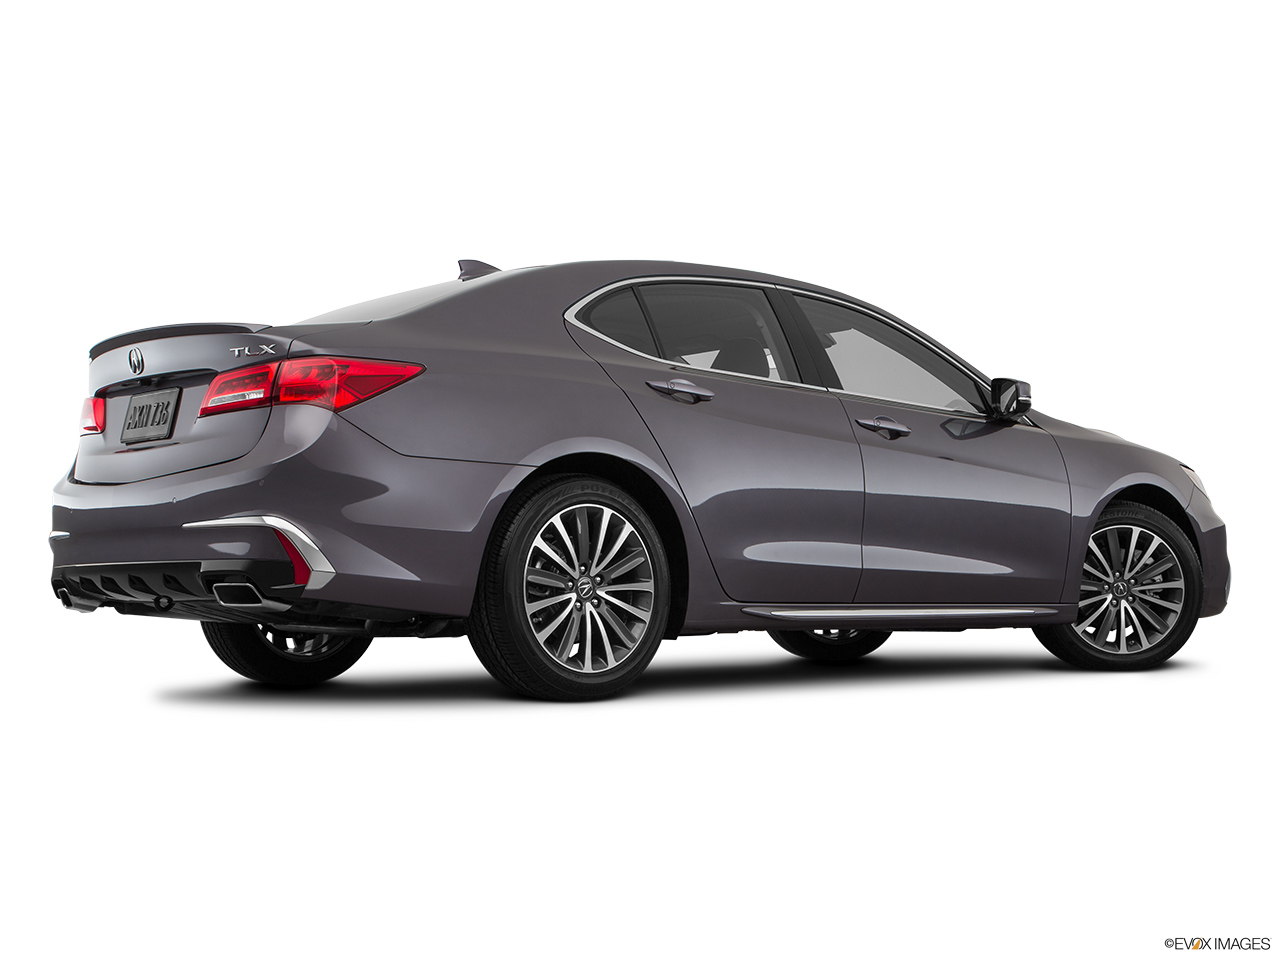 2018 Acura TLX 3.5L Low/wide rear 5/8. 